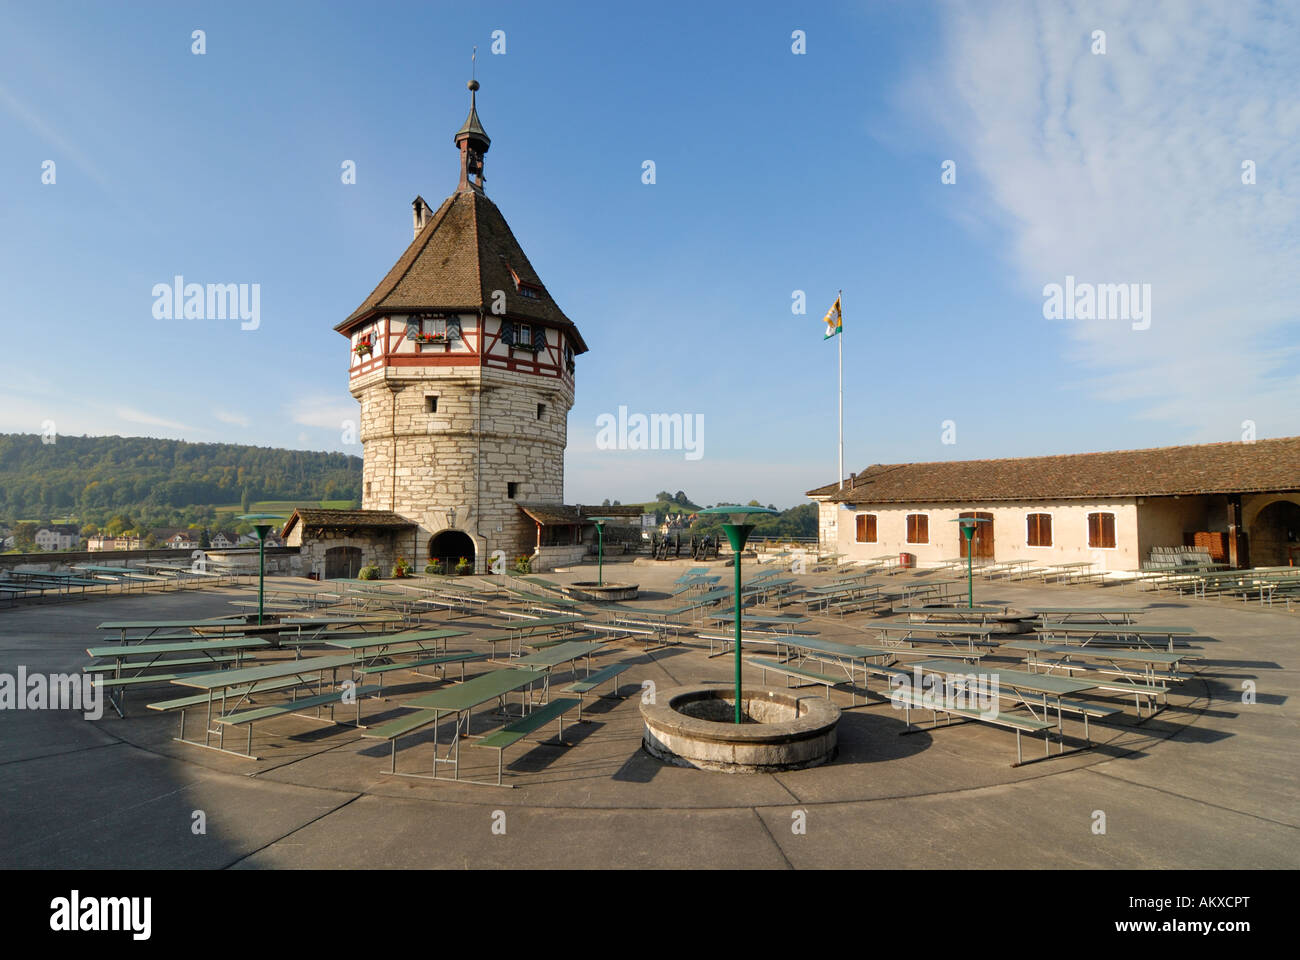 Schaffhausen - the tower from the munot castle - Switzerland, Europe. Stock Photo